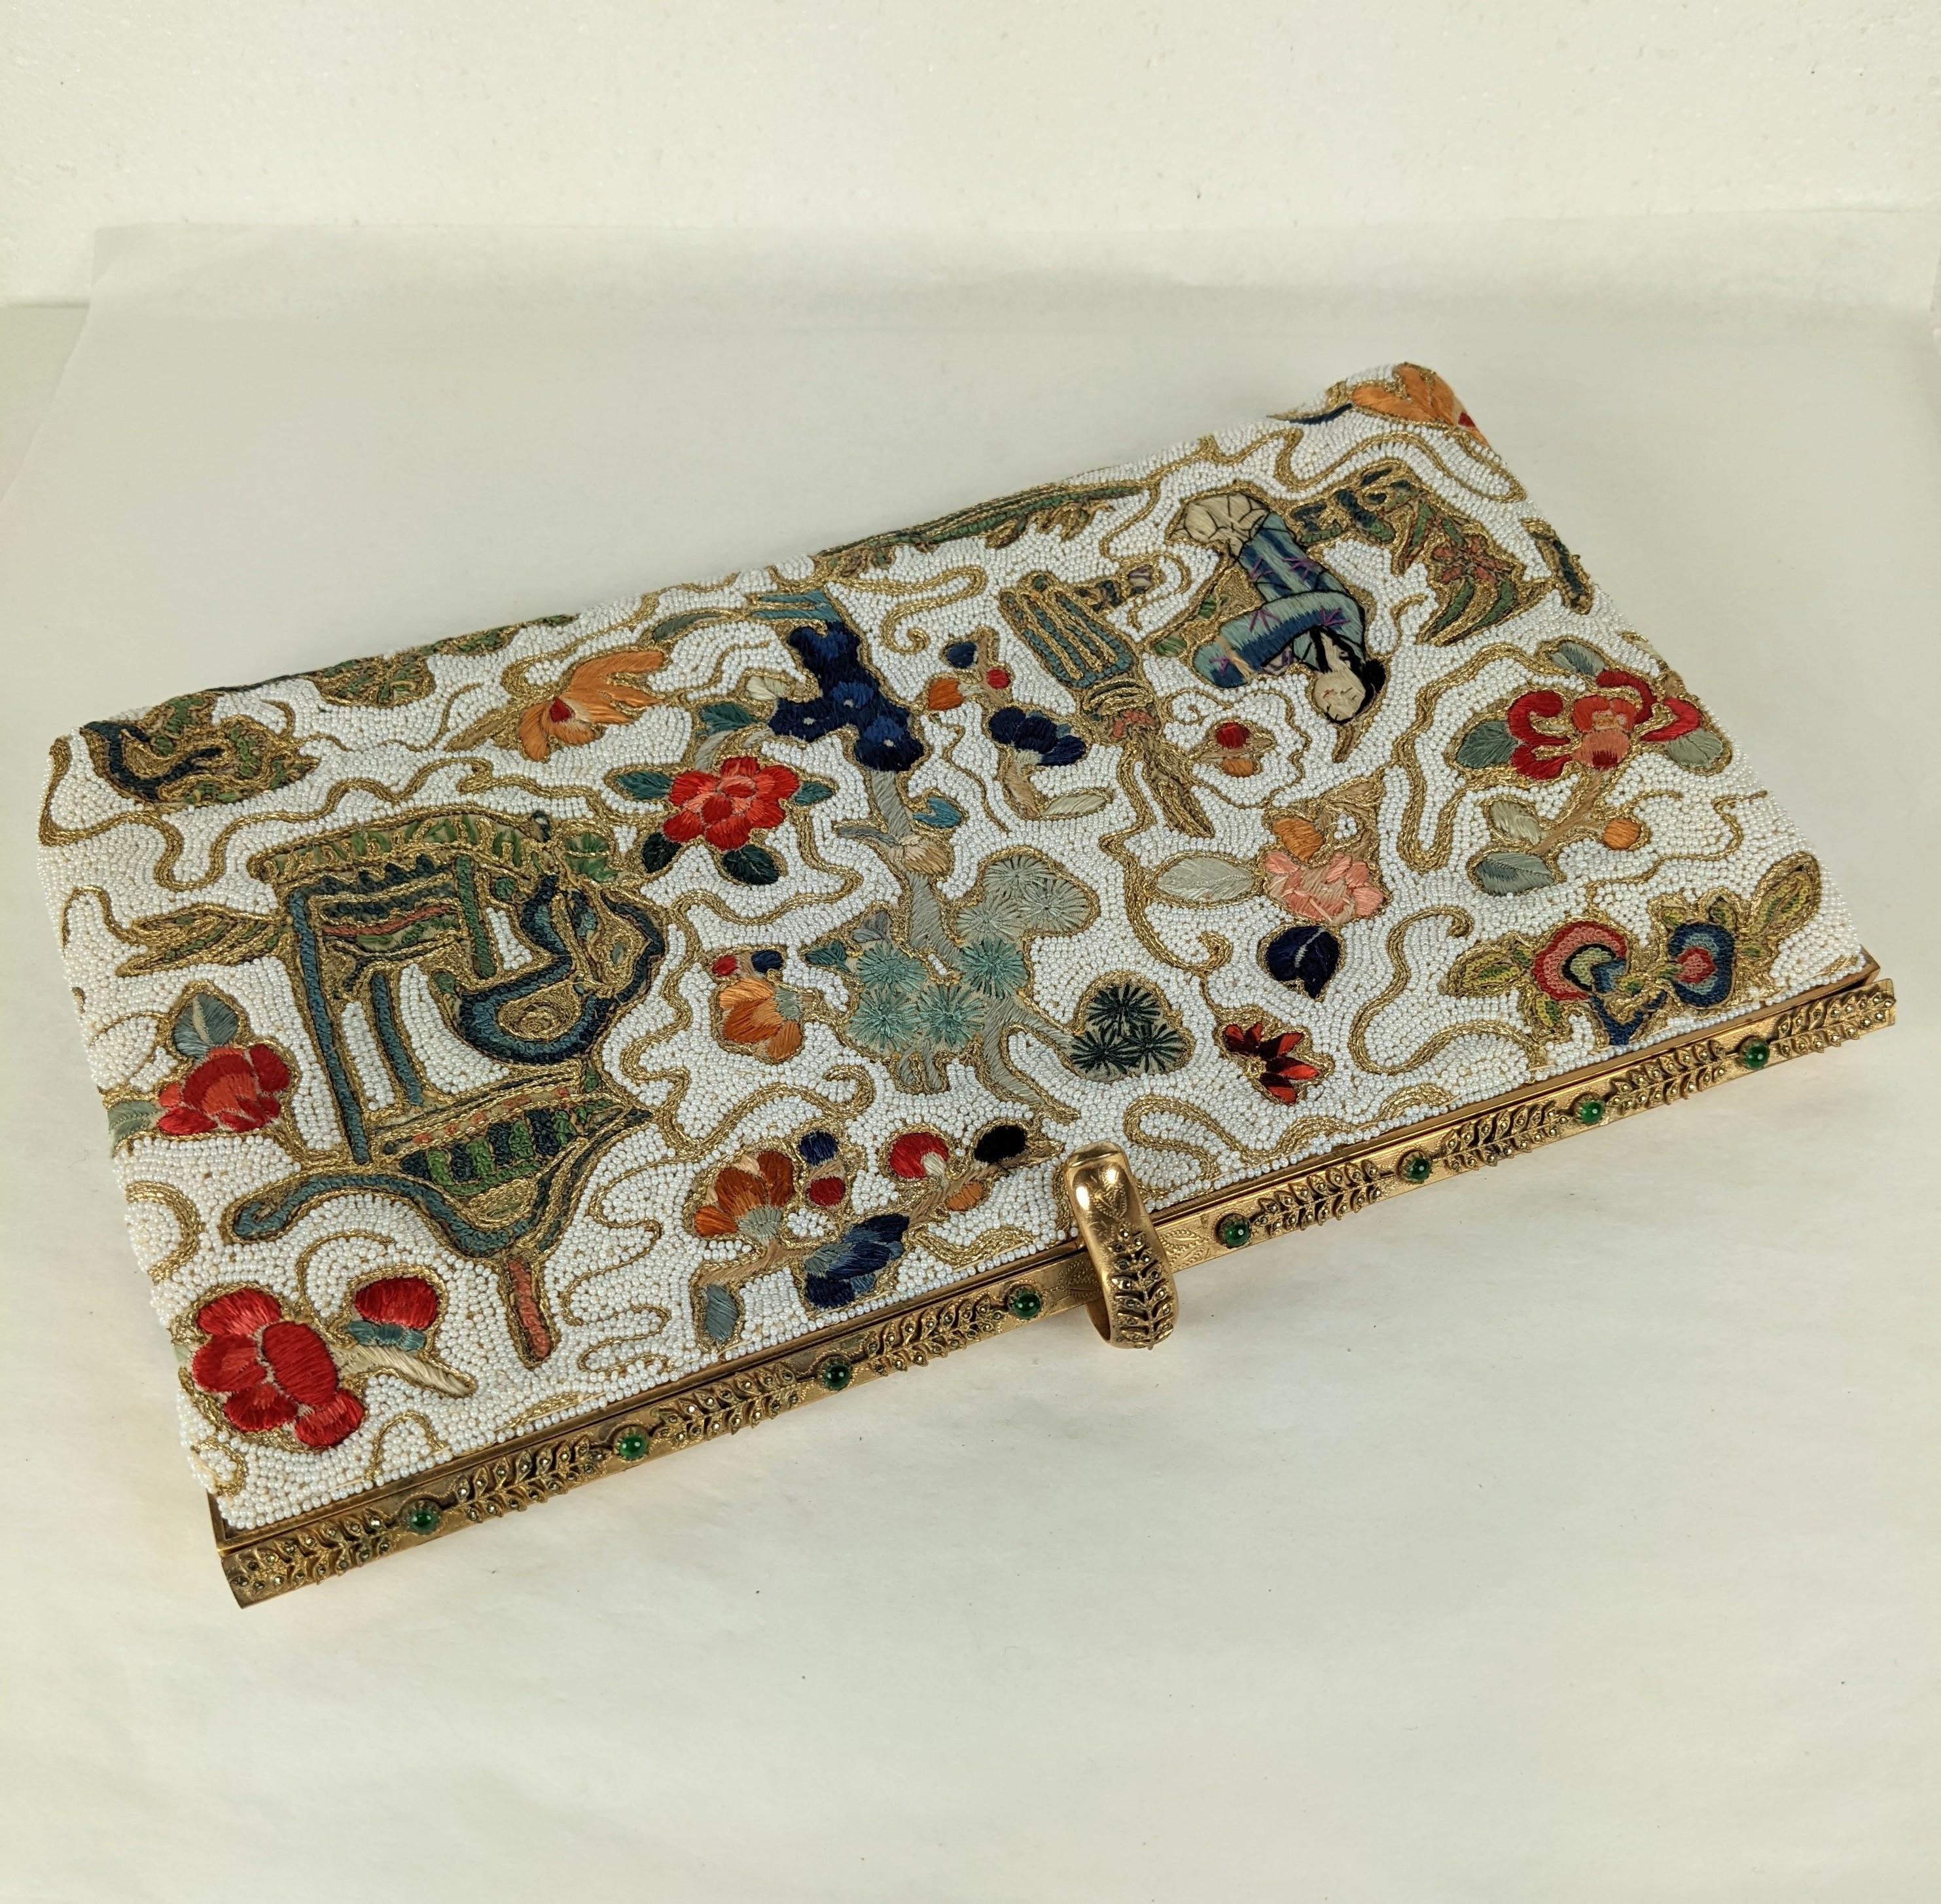 Chic Hand Embroidered and Beaded Chinoiserie Clutch made in France from antique Chinese textile from the early 20th Century. Wonderful quality with marcasite set fern motifs with Green glass cabochons. Lined in silk satin with gold lame cording with